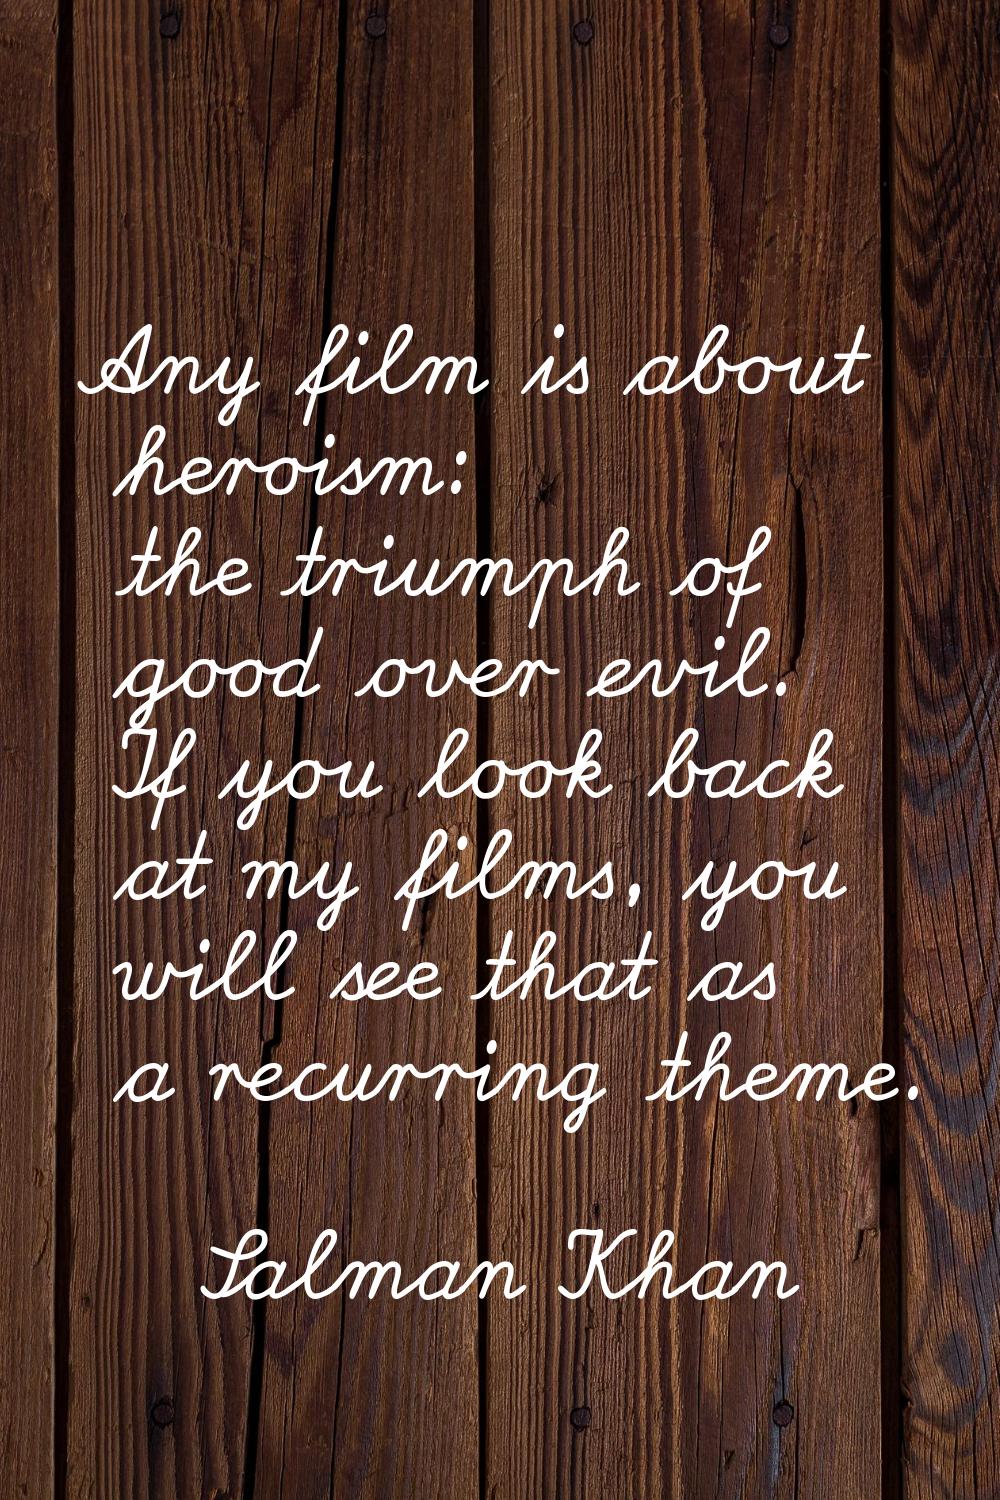 Any film is about heroism: the triumph of good over evil. If you look back at my films, you will se